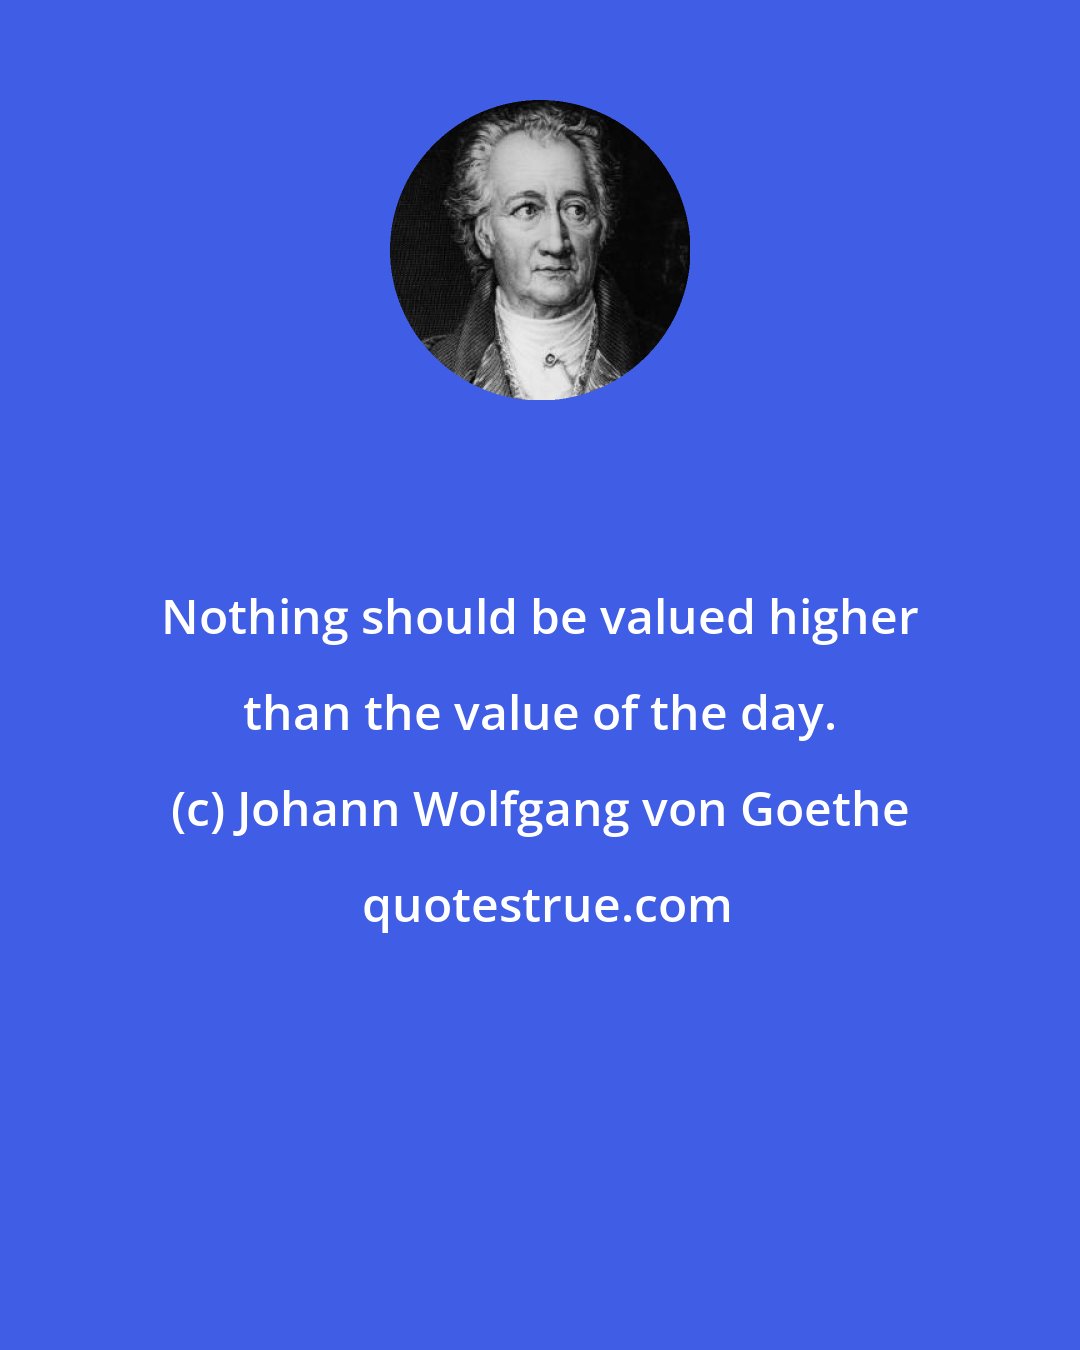 Johann Wolfgang von Goethe: Nothing should be valued higher than the value of the day.